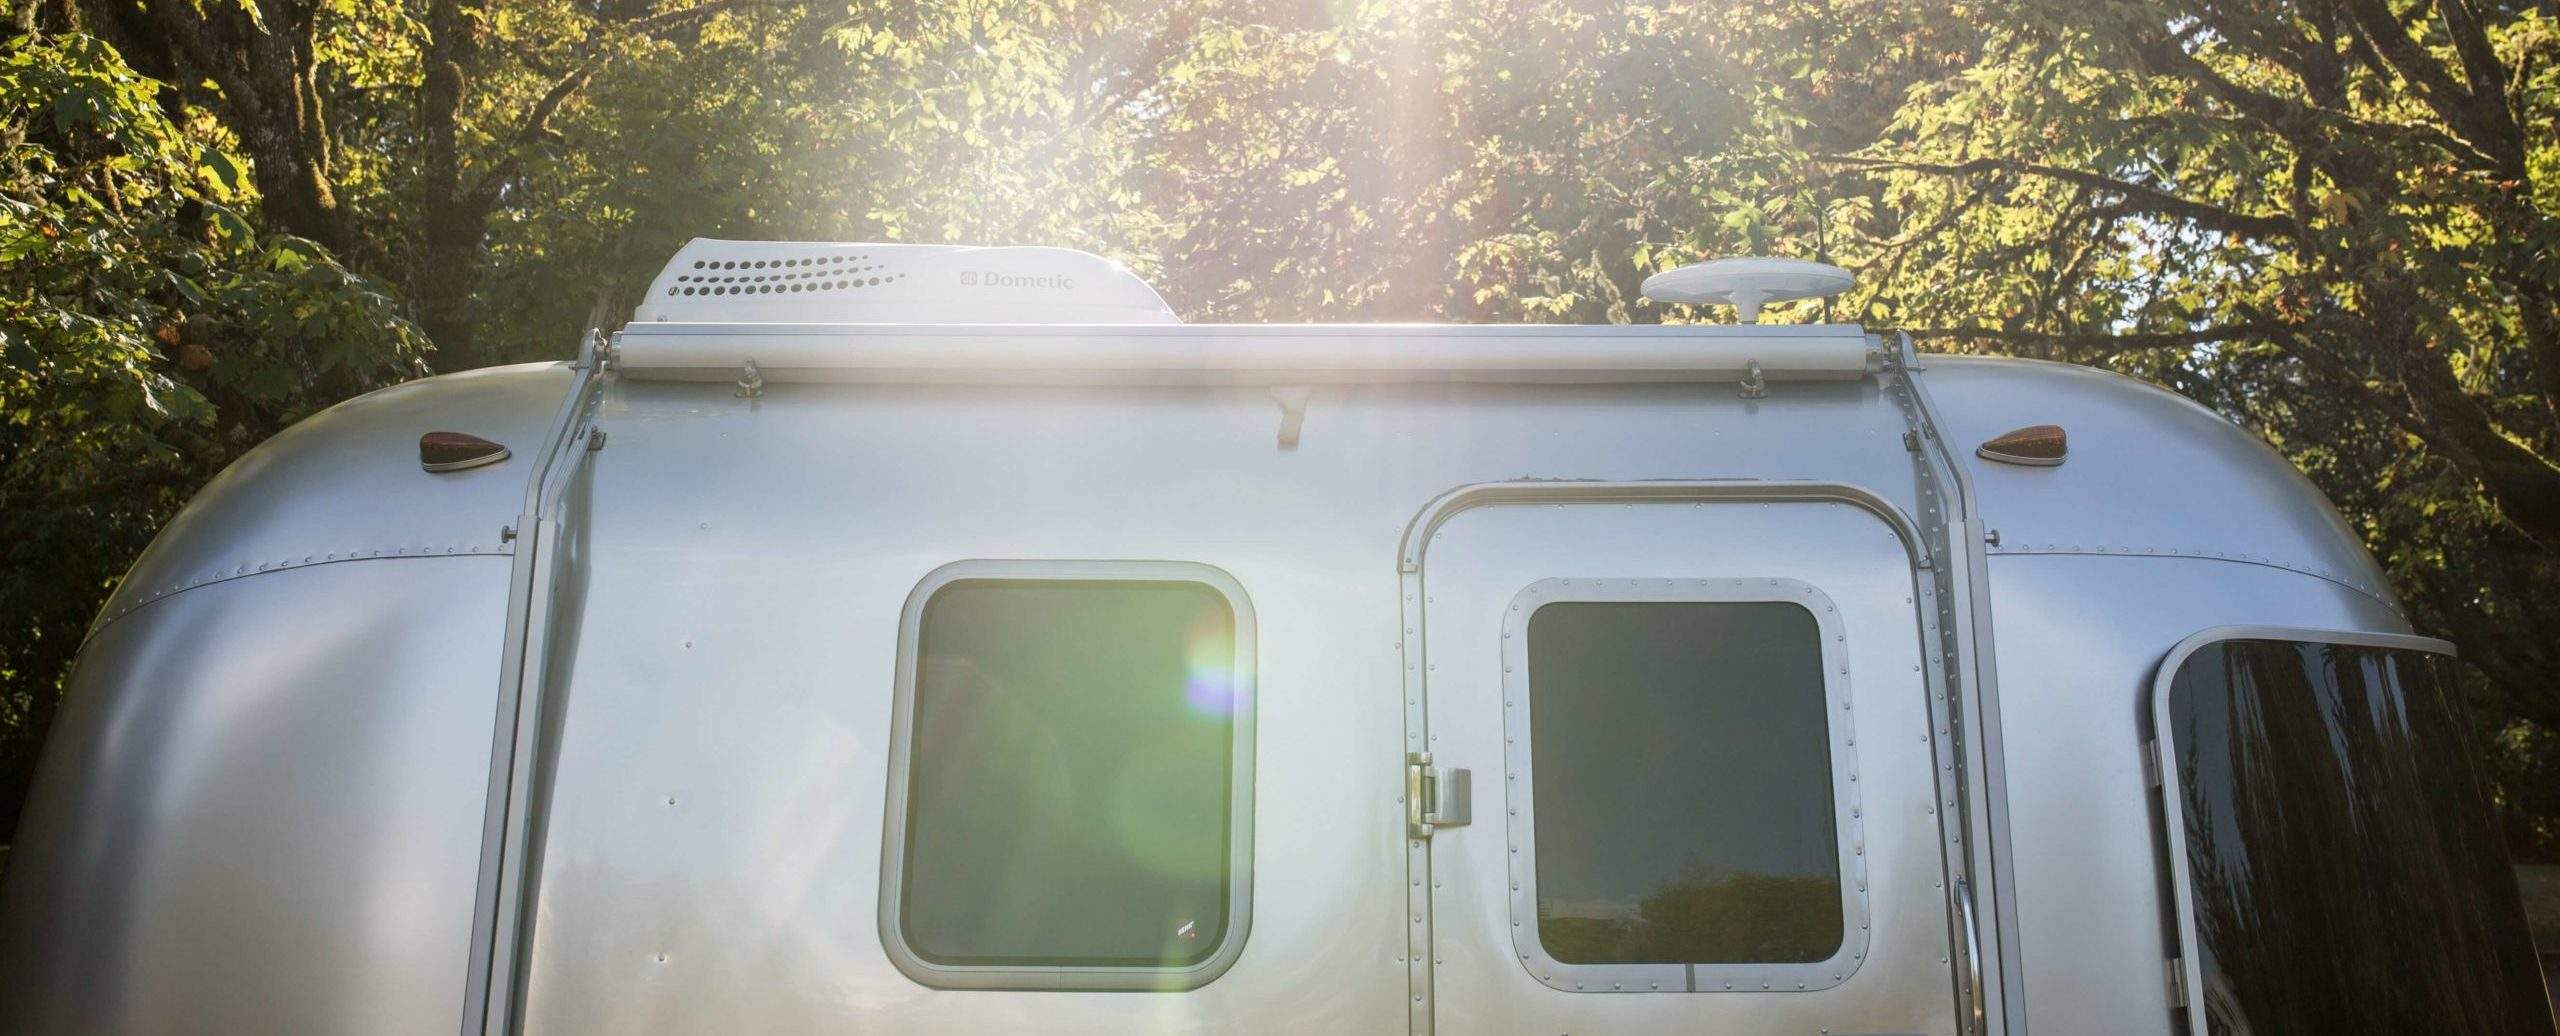 Do Small Campers Still Have Bathrooms? These 10 Do.